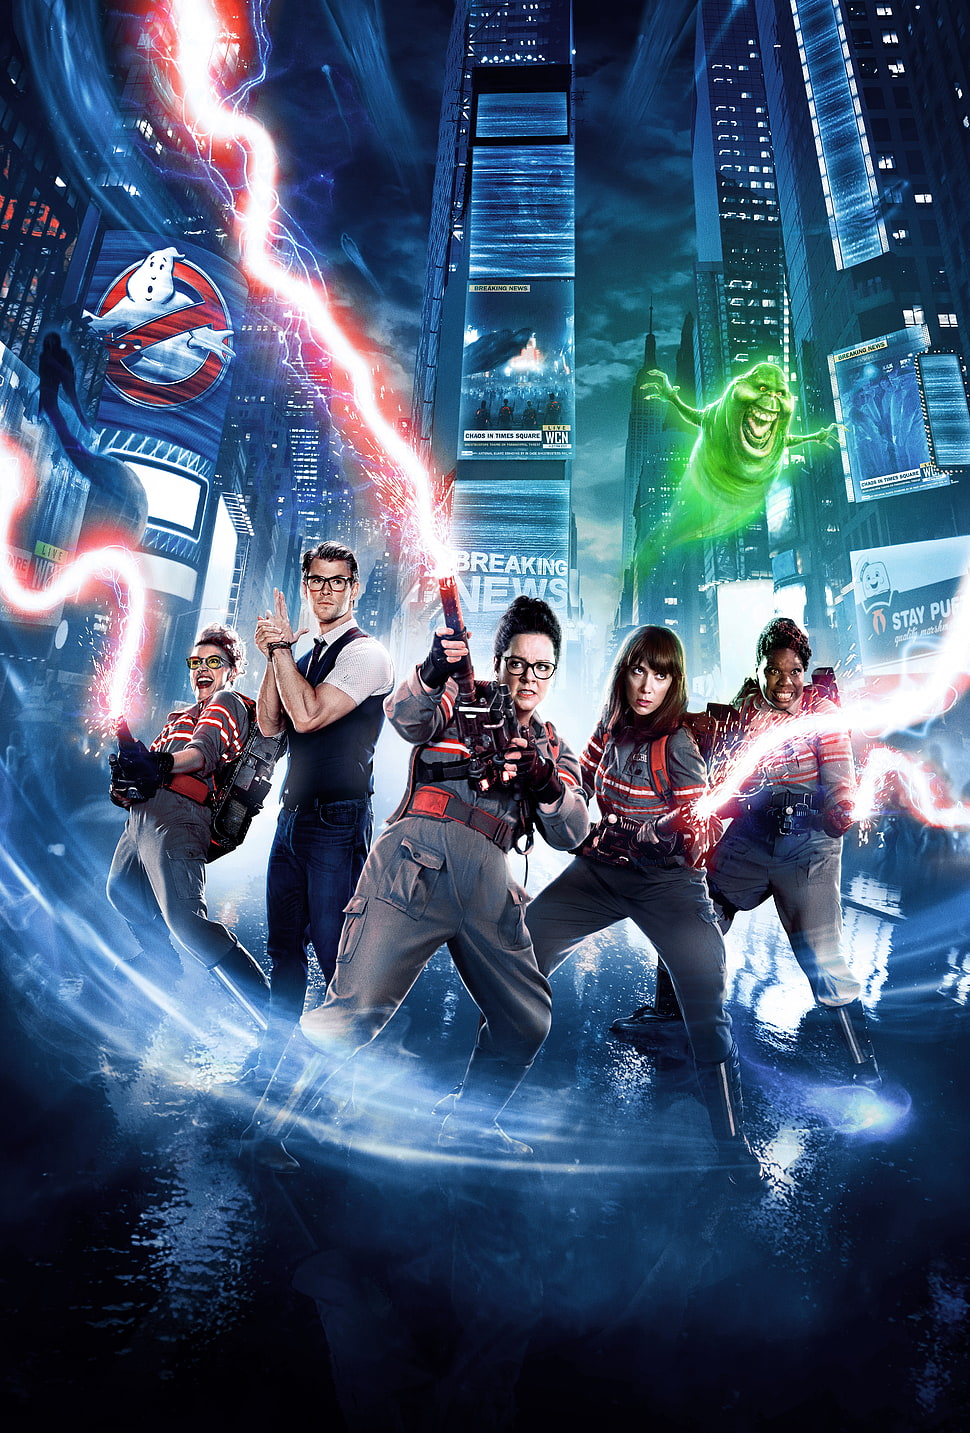 Ghost Buster poster HD wallpaper